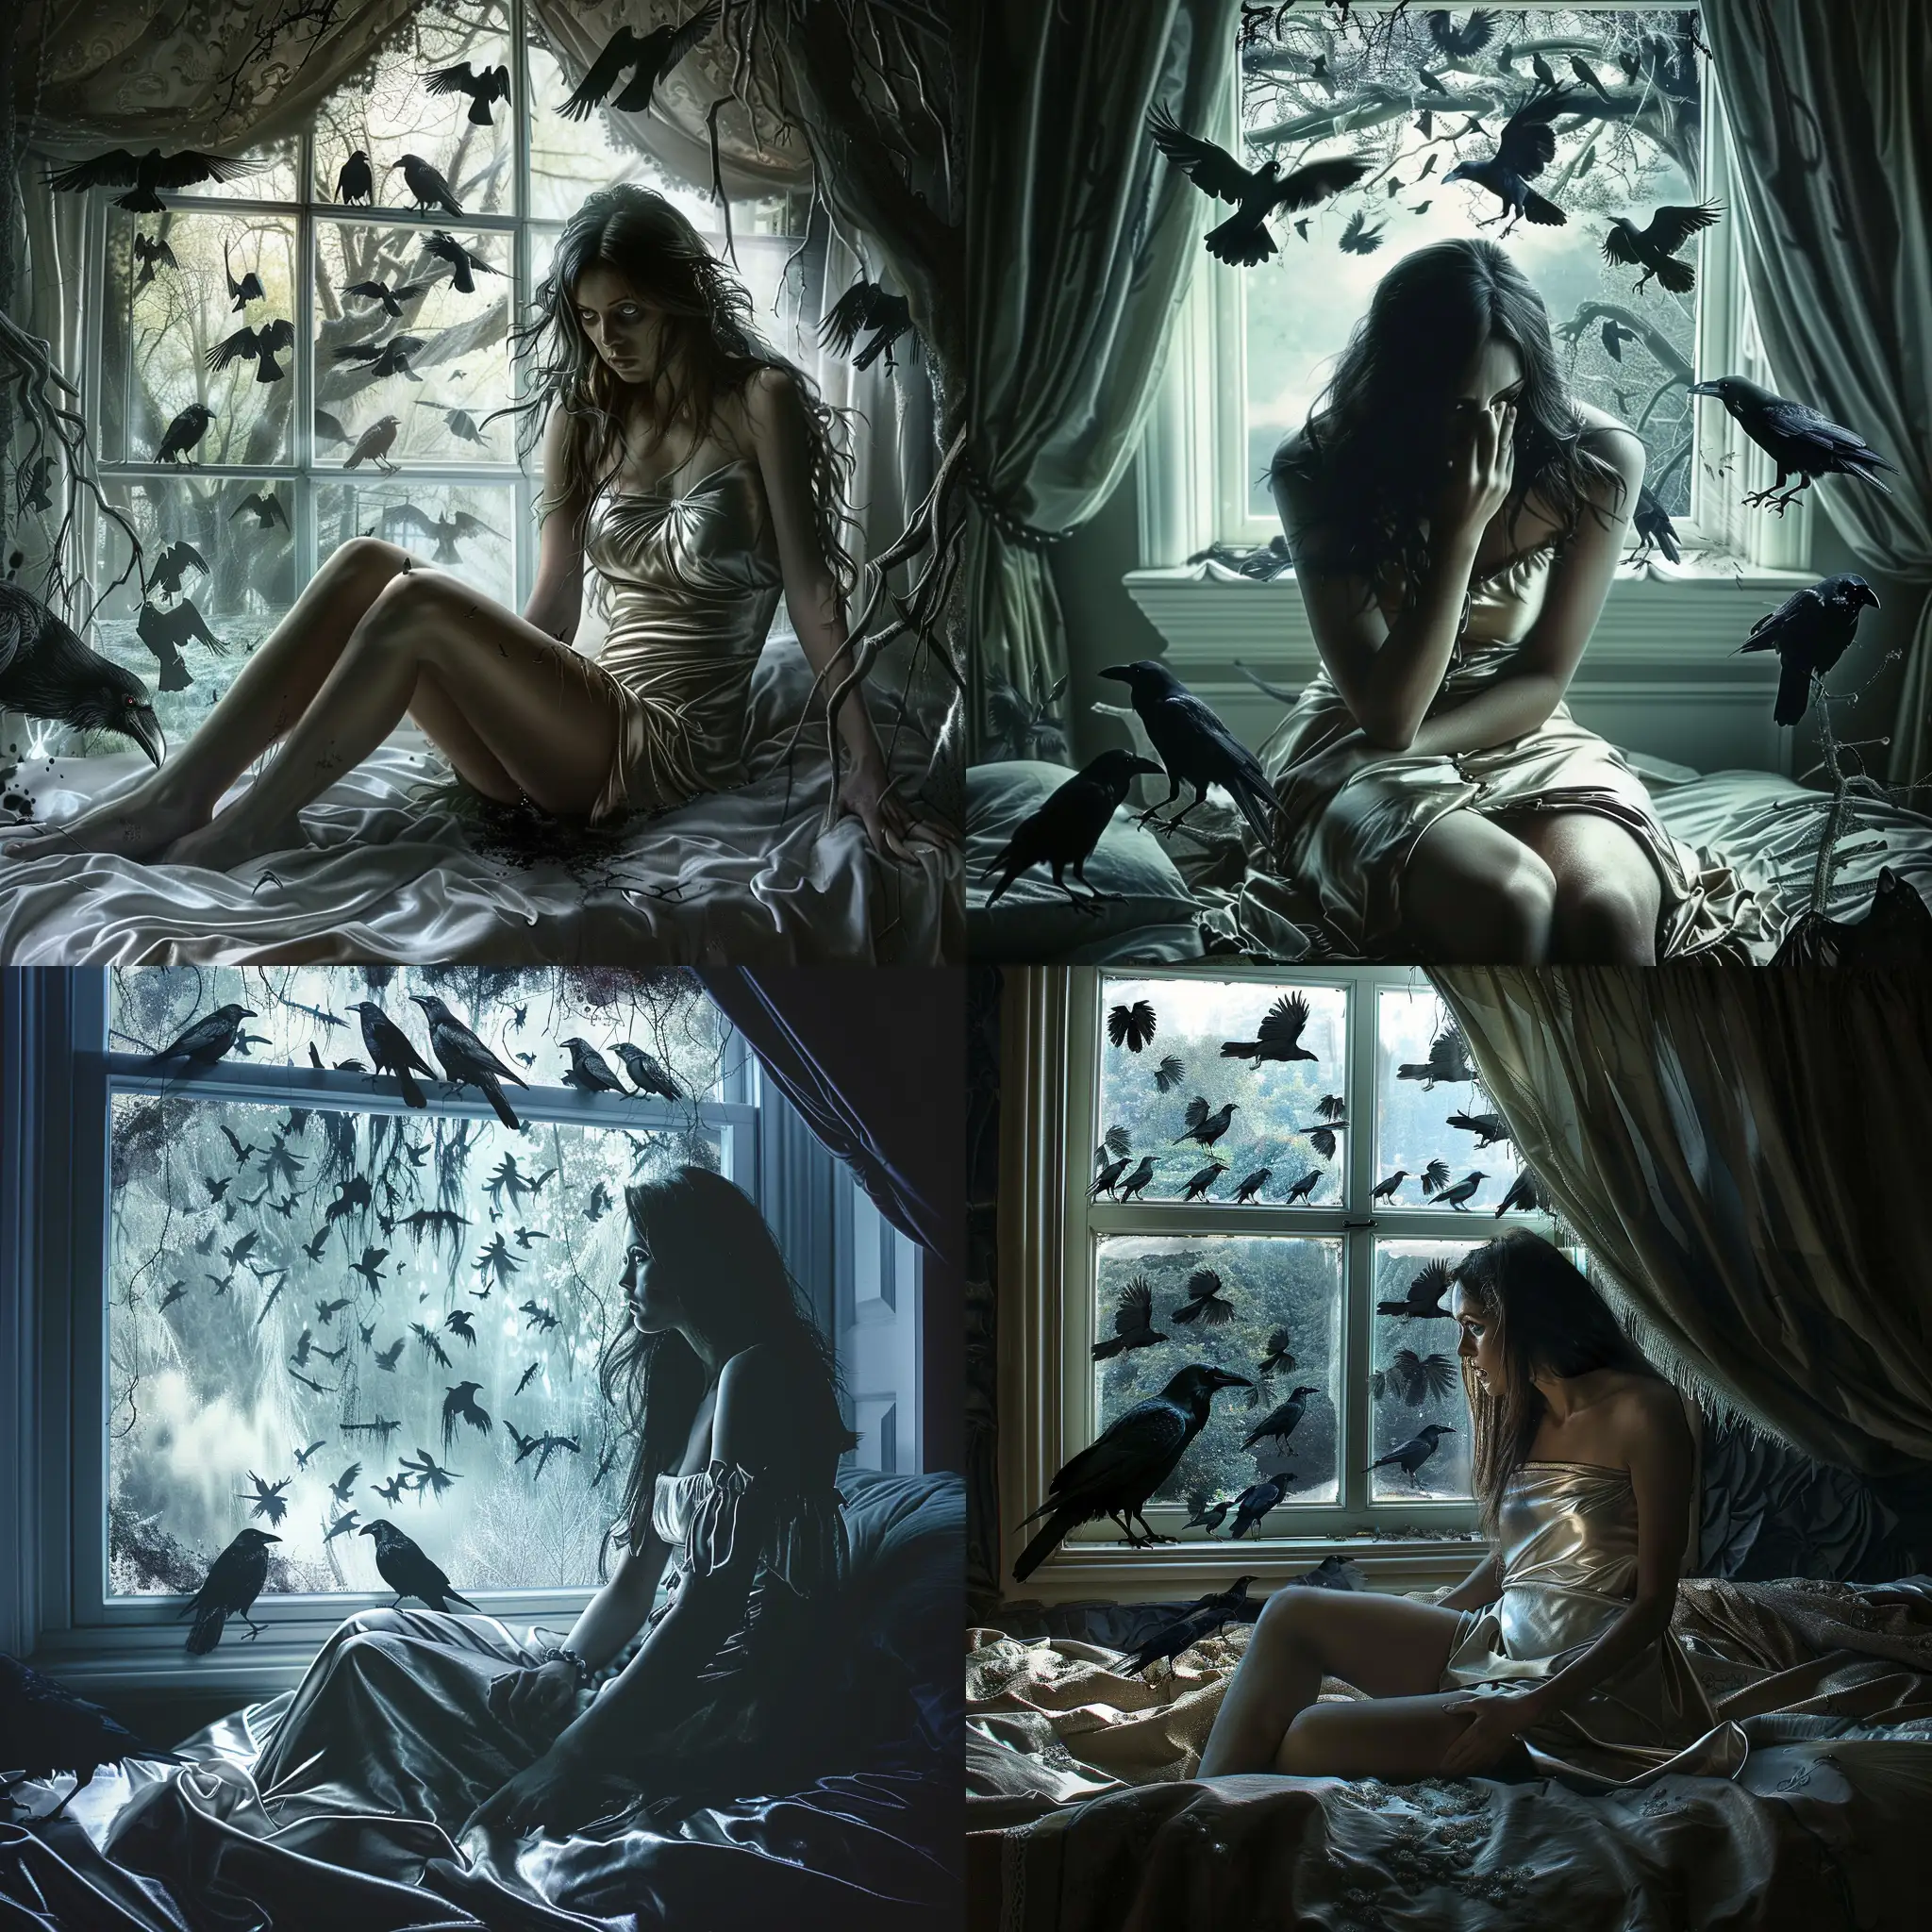 Gothic-Fantasy-Art-Beautiful-Fearful-Woman-in-Satin-Nightdress-with-Menacing-Ravens-Outside